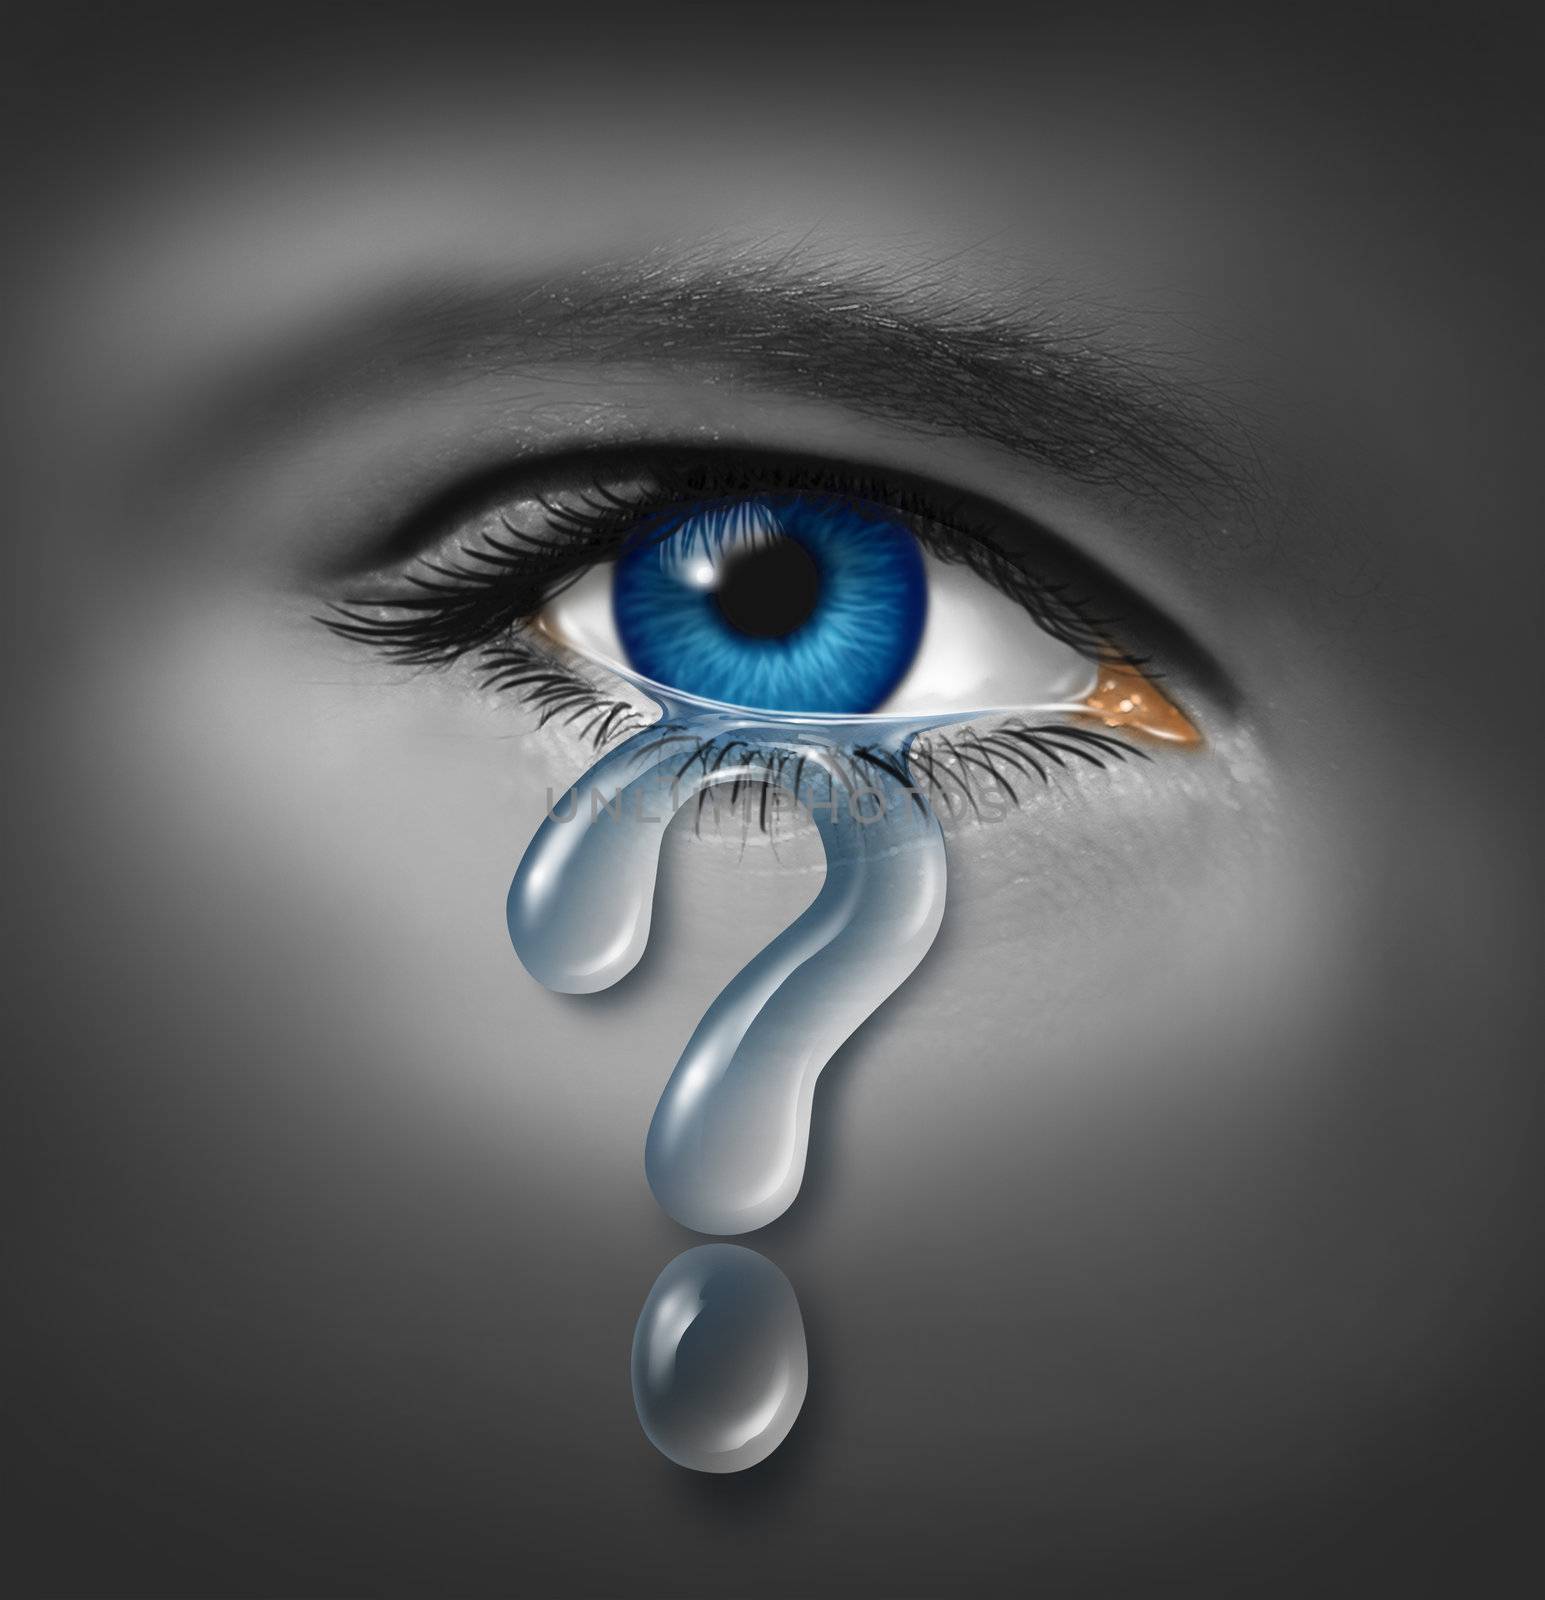 Depression Symptoms and understanding the mood swings that result in feeling sad and down caused by stress helplessness and hopelessness with a close up of a human eye with a crying tear drop in the shape of a question mark.